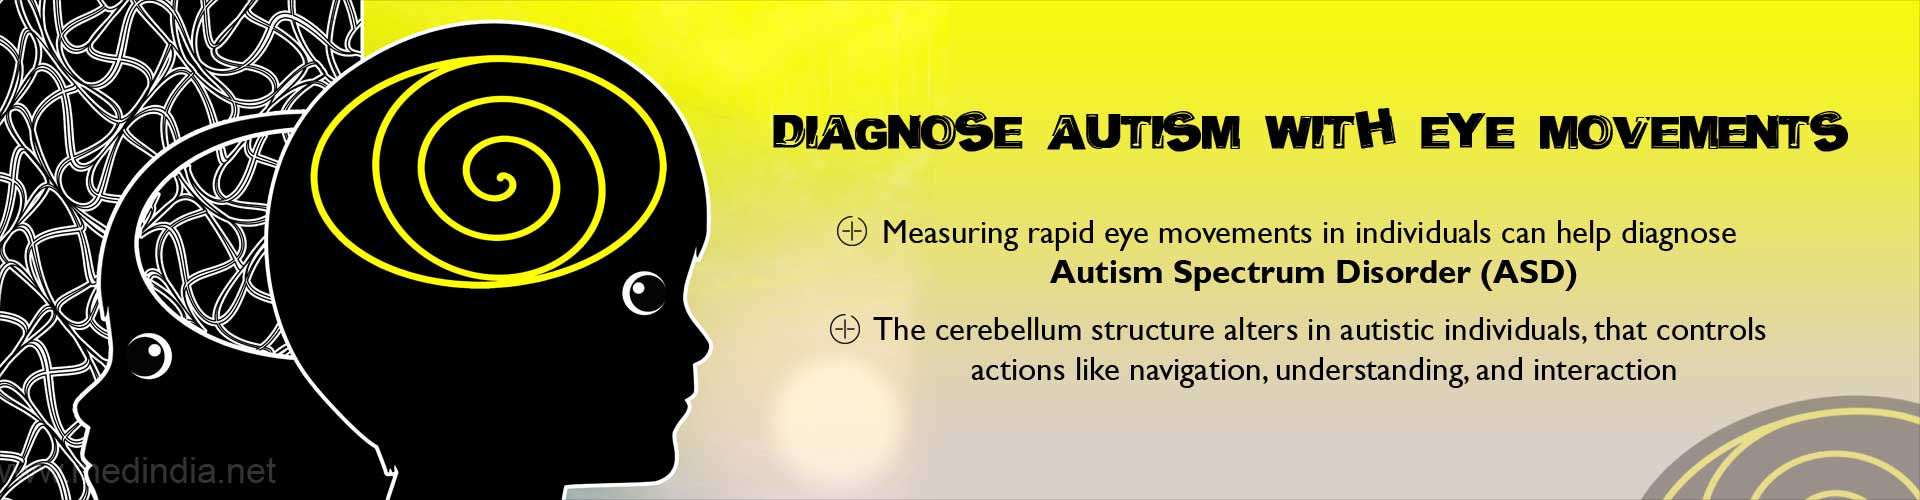 Diagnose autism with eye movements
- Measuring rapid eye movements in individuals can help diagnose Autism Spectrum Disorder (ASD)
- The cerebellum structure in autistic individuals, that controls actions like navigation, understanding, and interaction